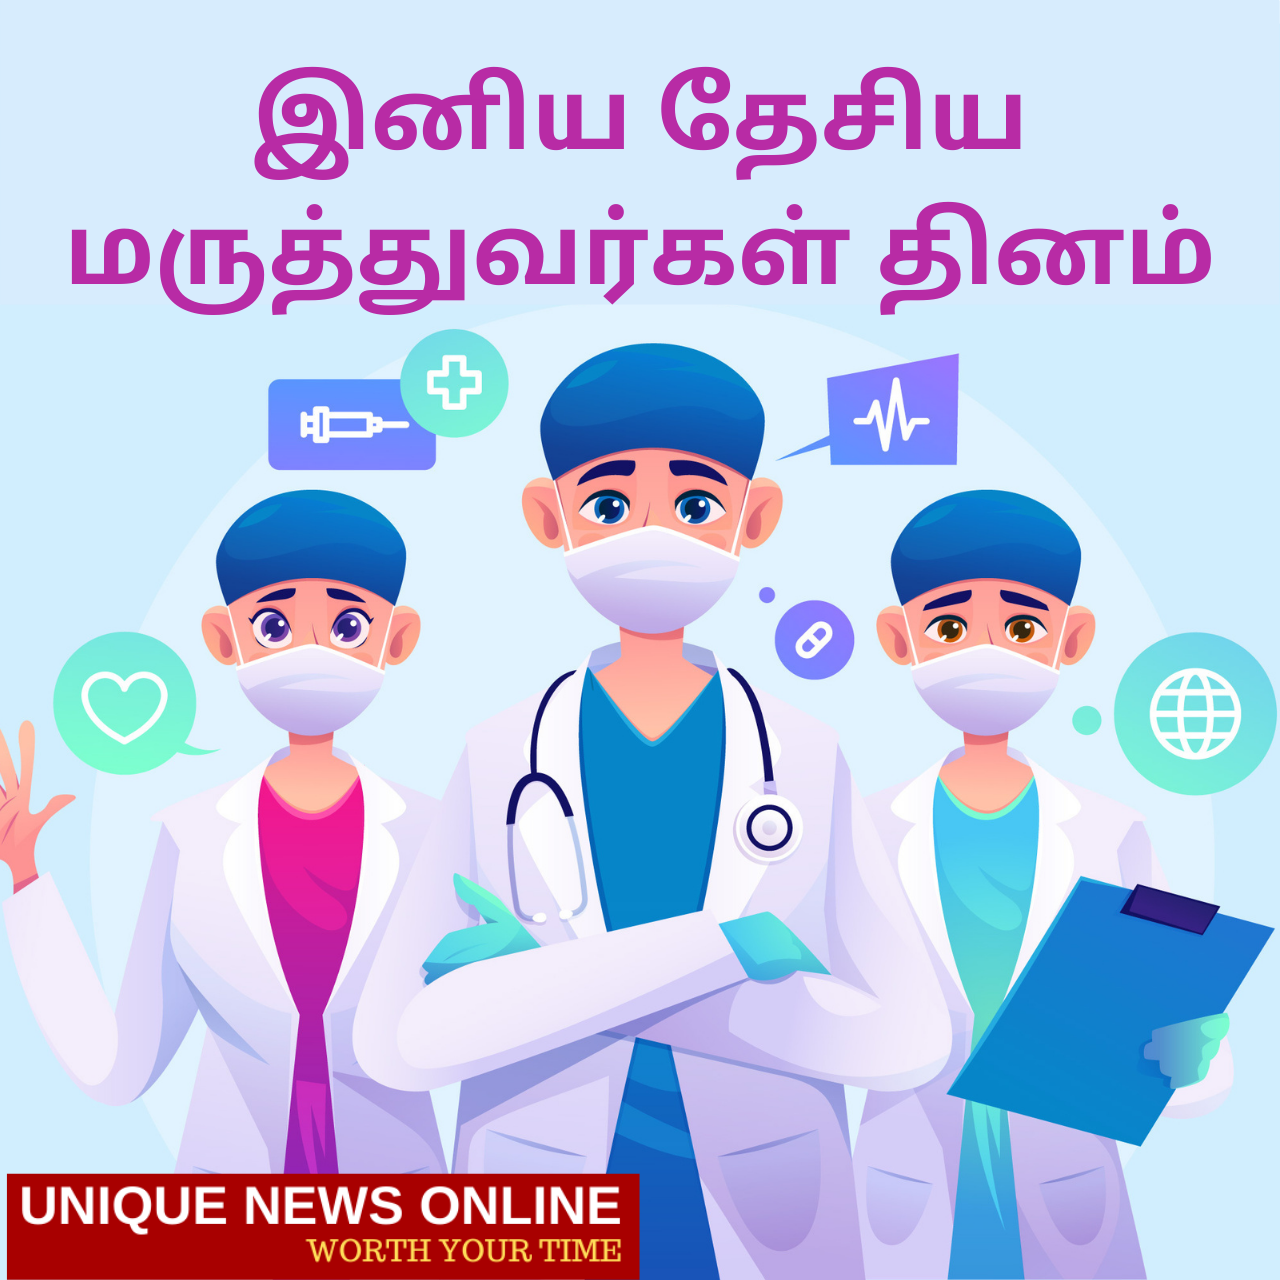 National Doctor's Day 2021: Tamil and Telugu Wishes, Images (photos), Greetings, Poster, and Messages to honor doctors